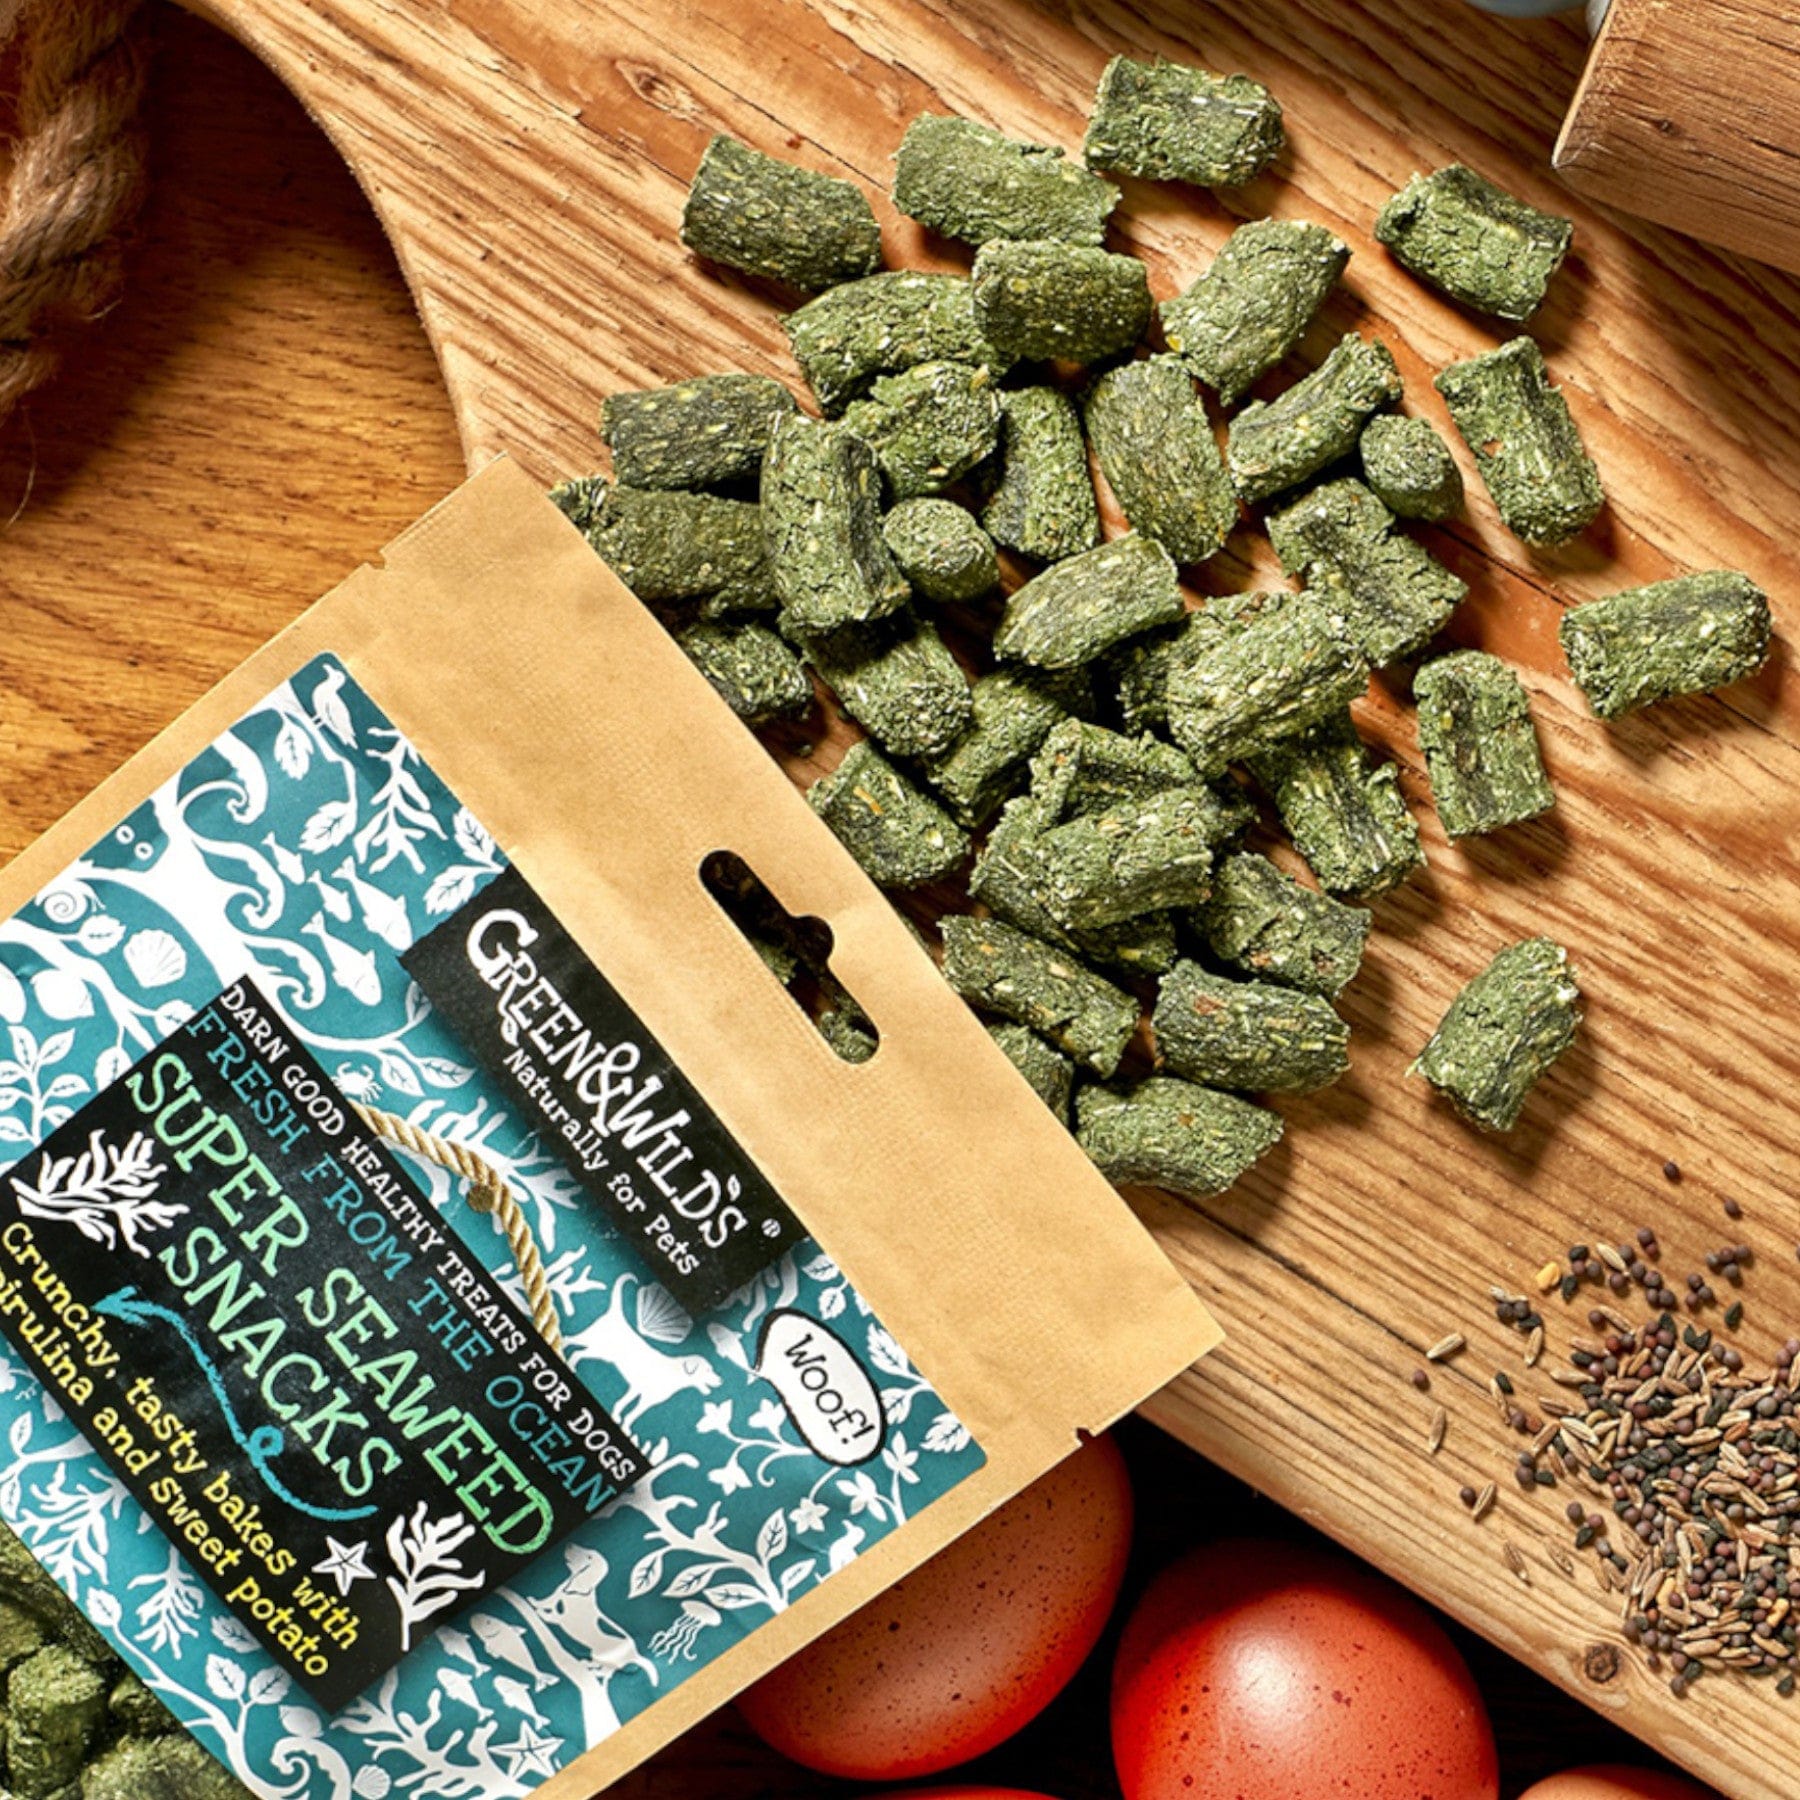 Organic Green & Wilds Super Seaweed Snacks packaging and scattered crunchy treats on wooden surface with brown eggs and jute bag visible.